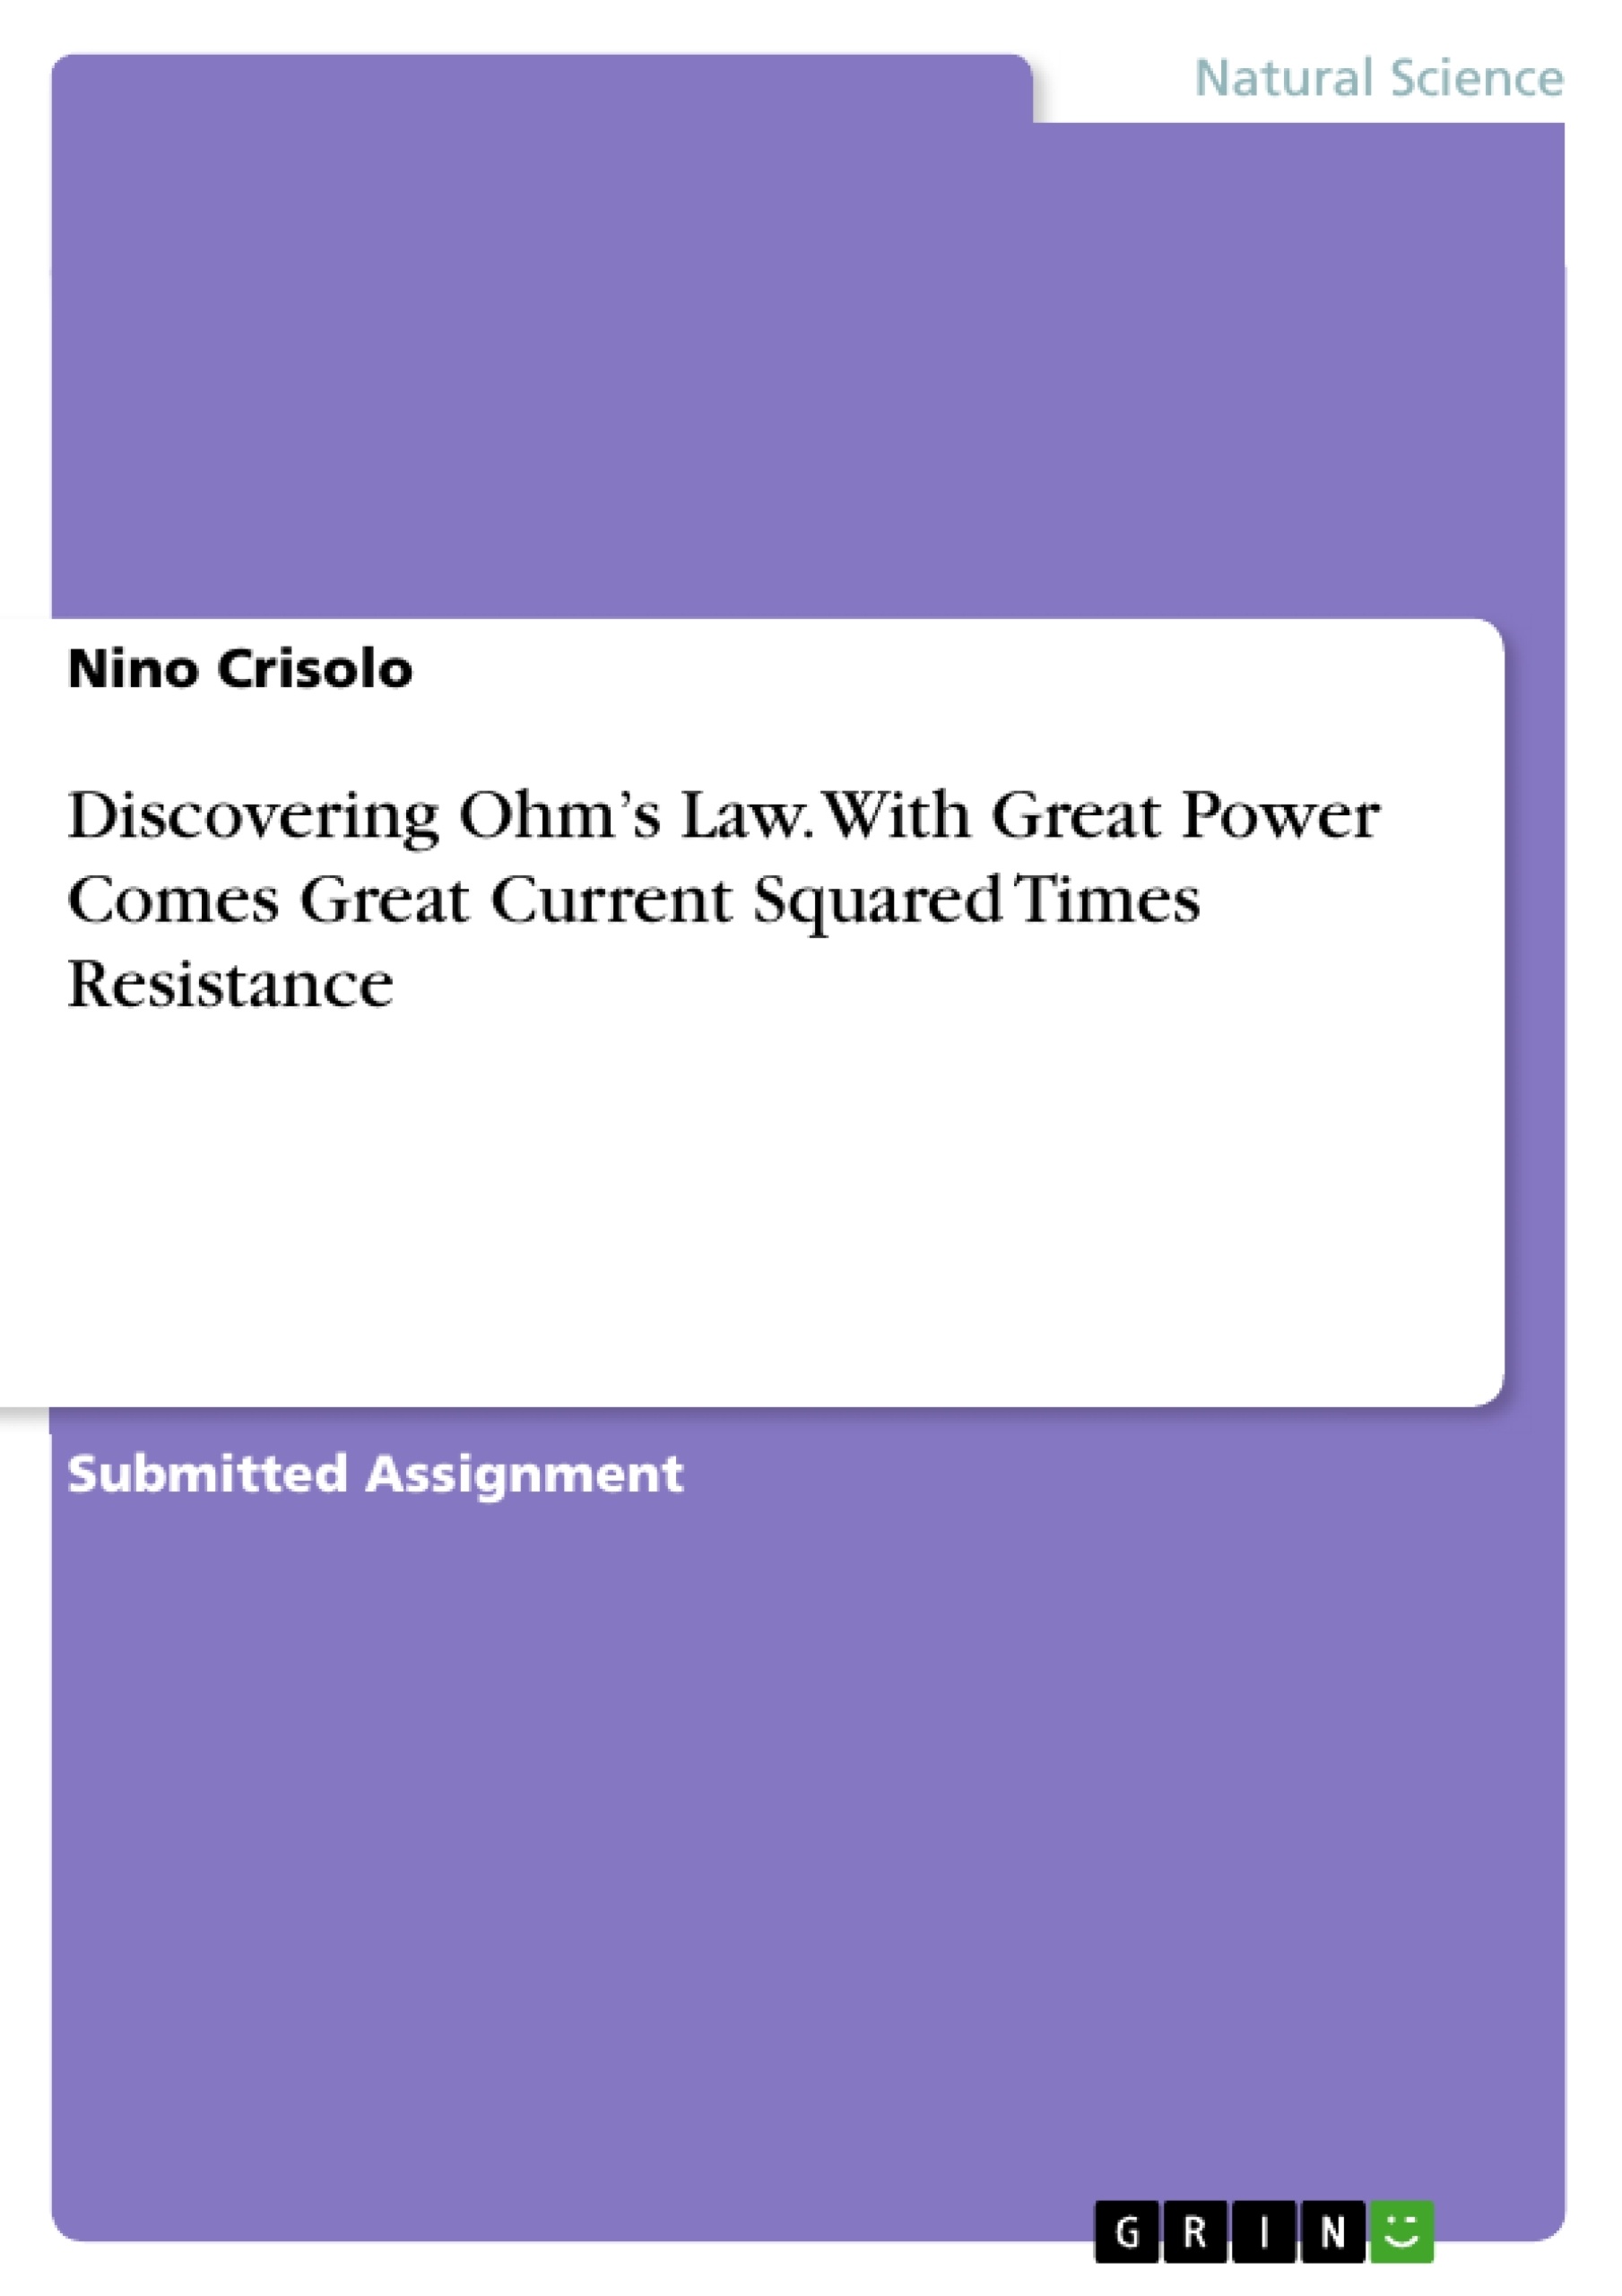 Título: Discovering Ohm’s Law. With Great Power Comes Great Current Squared Times Resistance